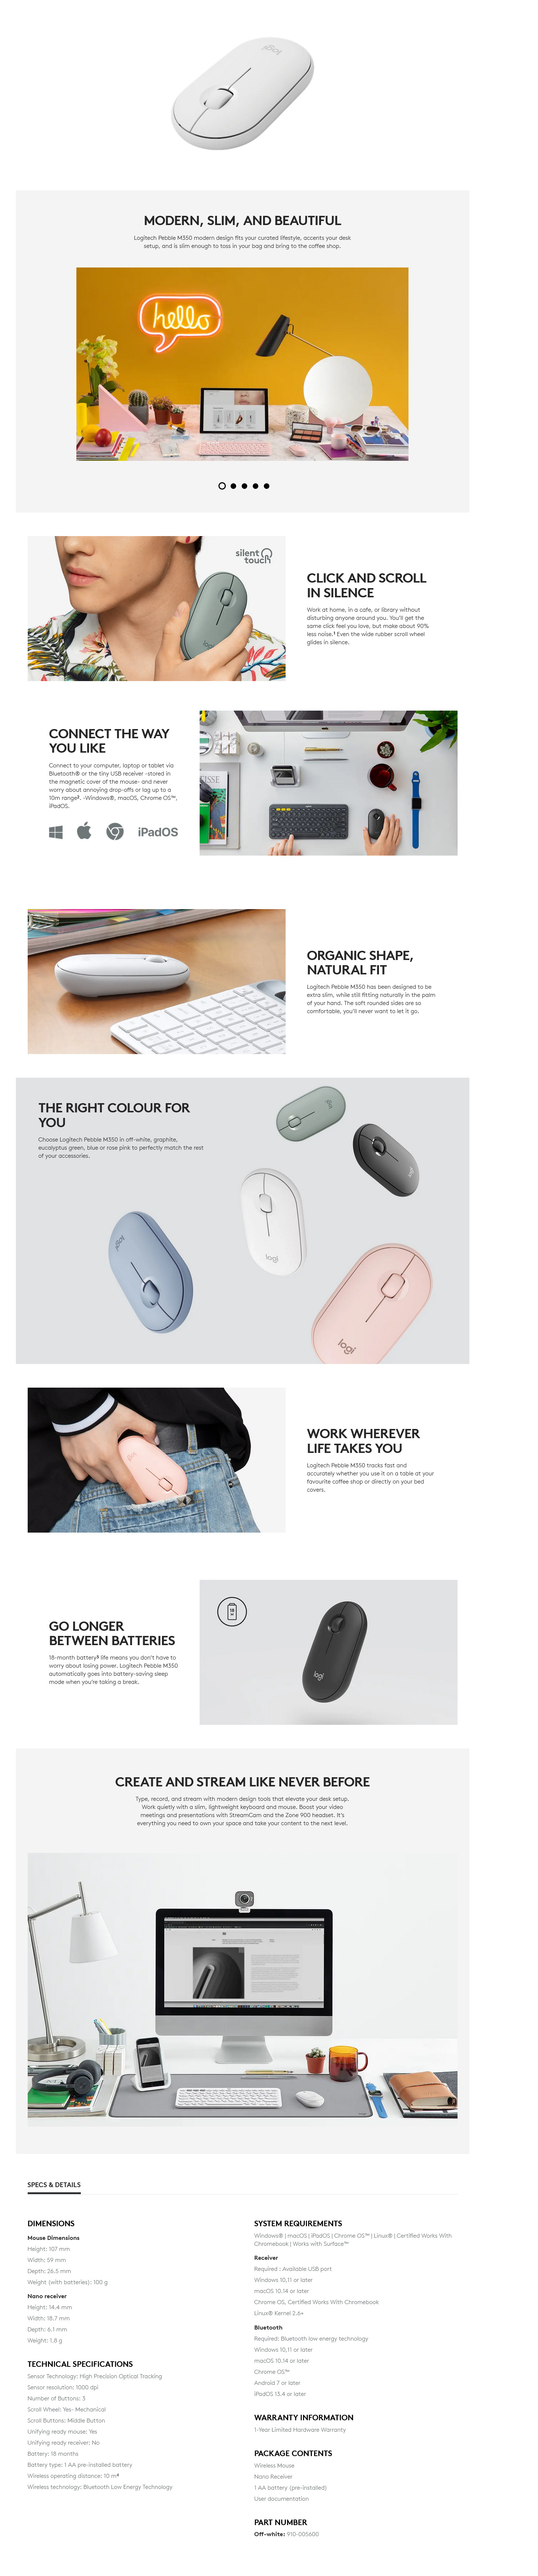 A large marketing image providing additional information about the product Logitech Pebble Slim Silent Wireless Mouse - Off-White - Additional alt info not provided